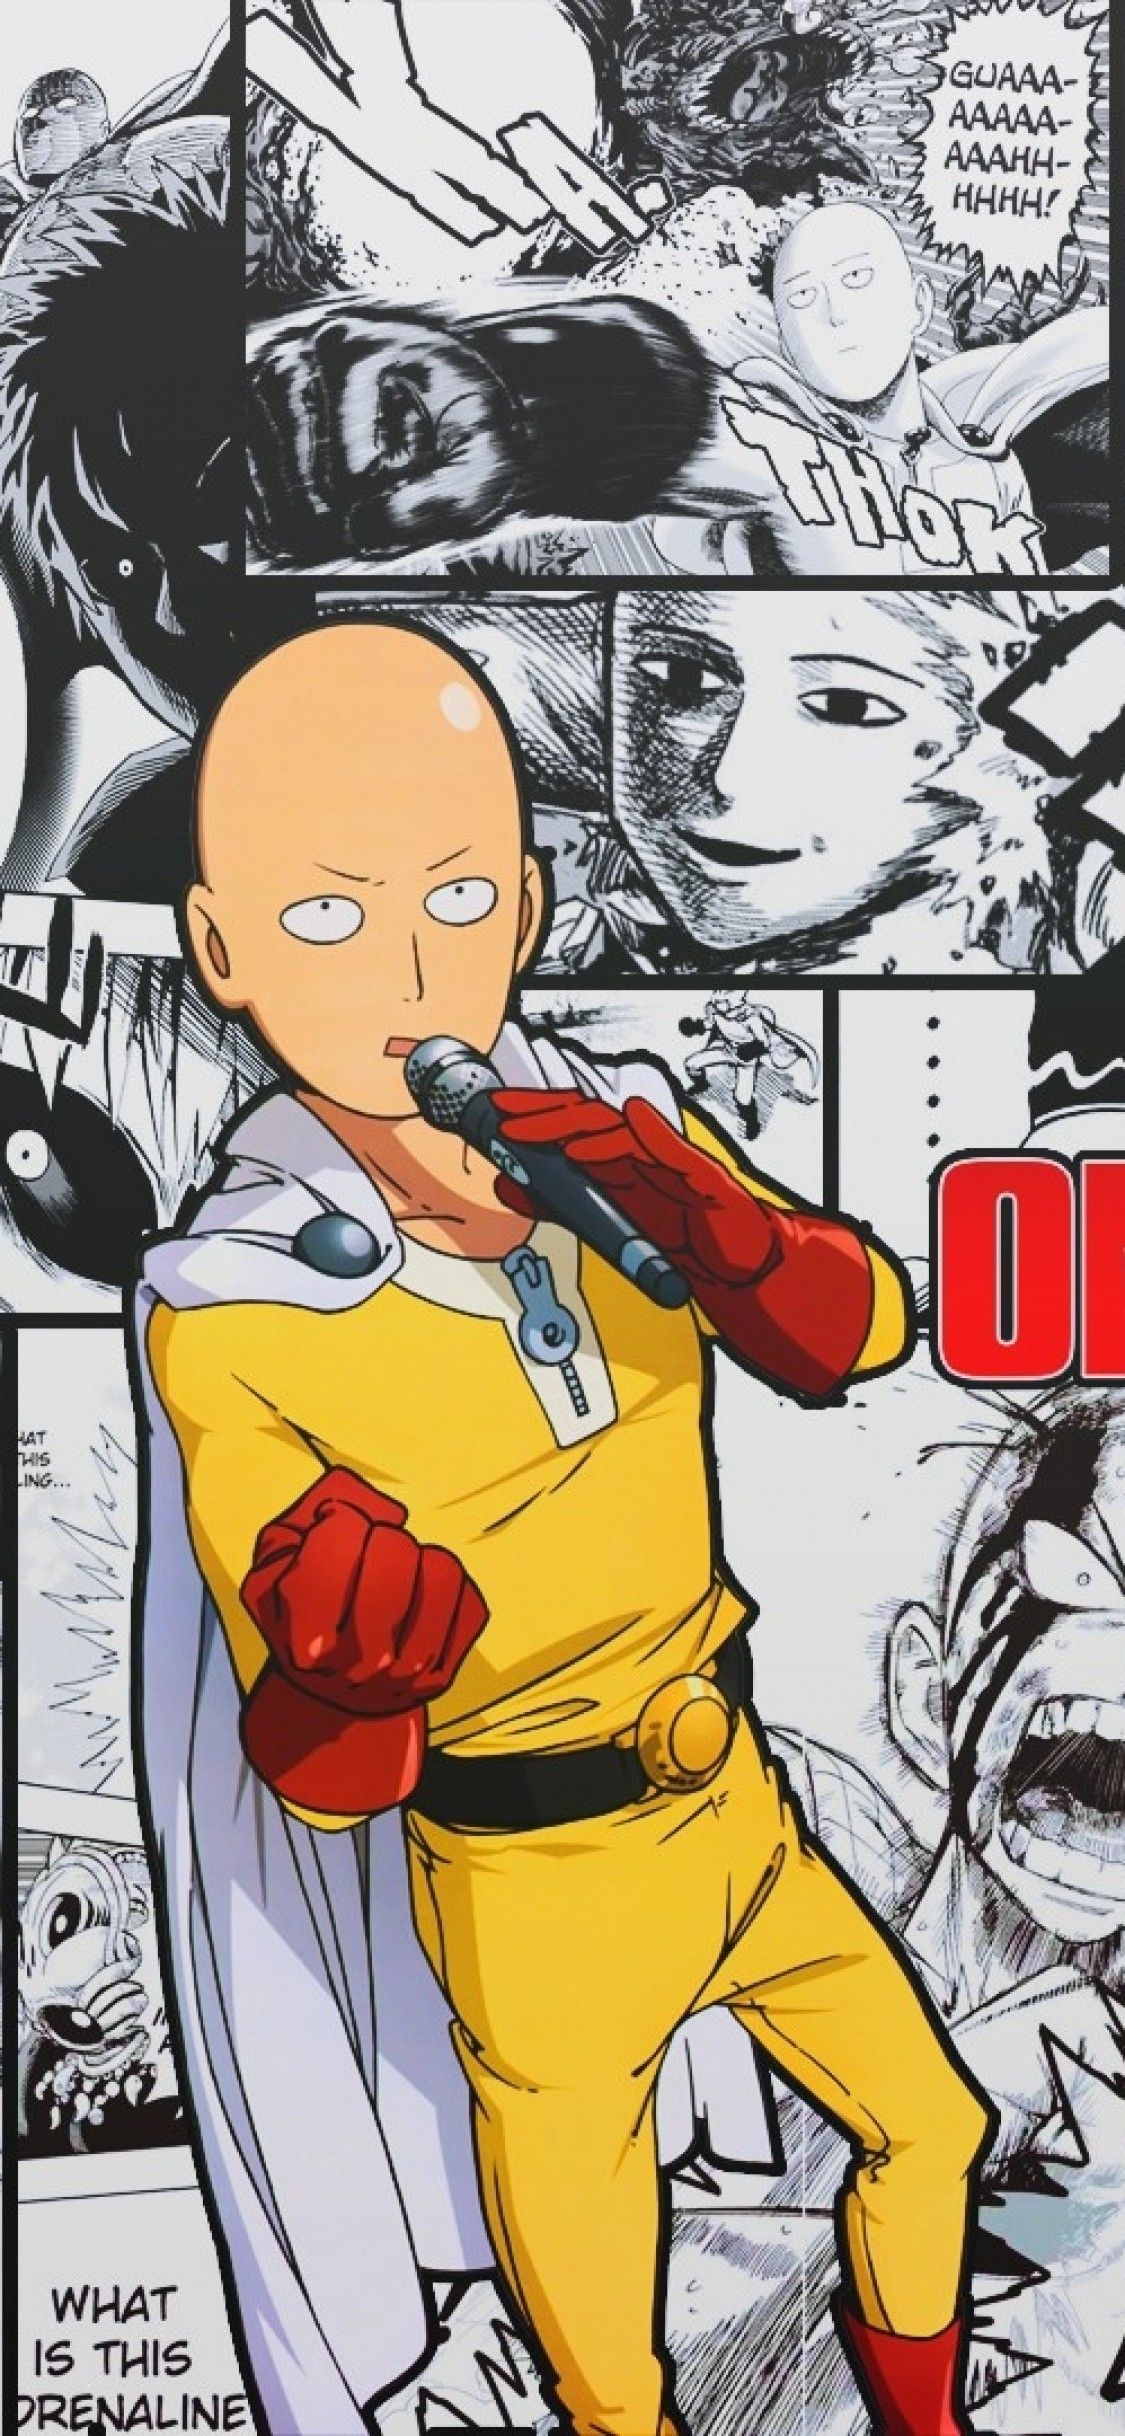 iPhone X Wallpapers: 35 Great Images For An AMOLED Screen  One punch man  anime, One punch man manga, Saitama one punch man